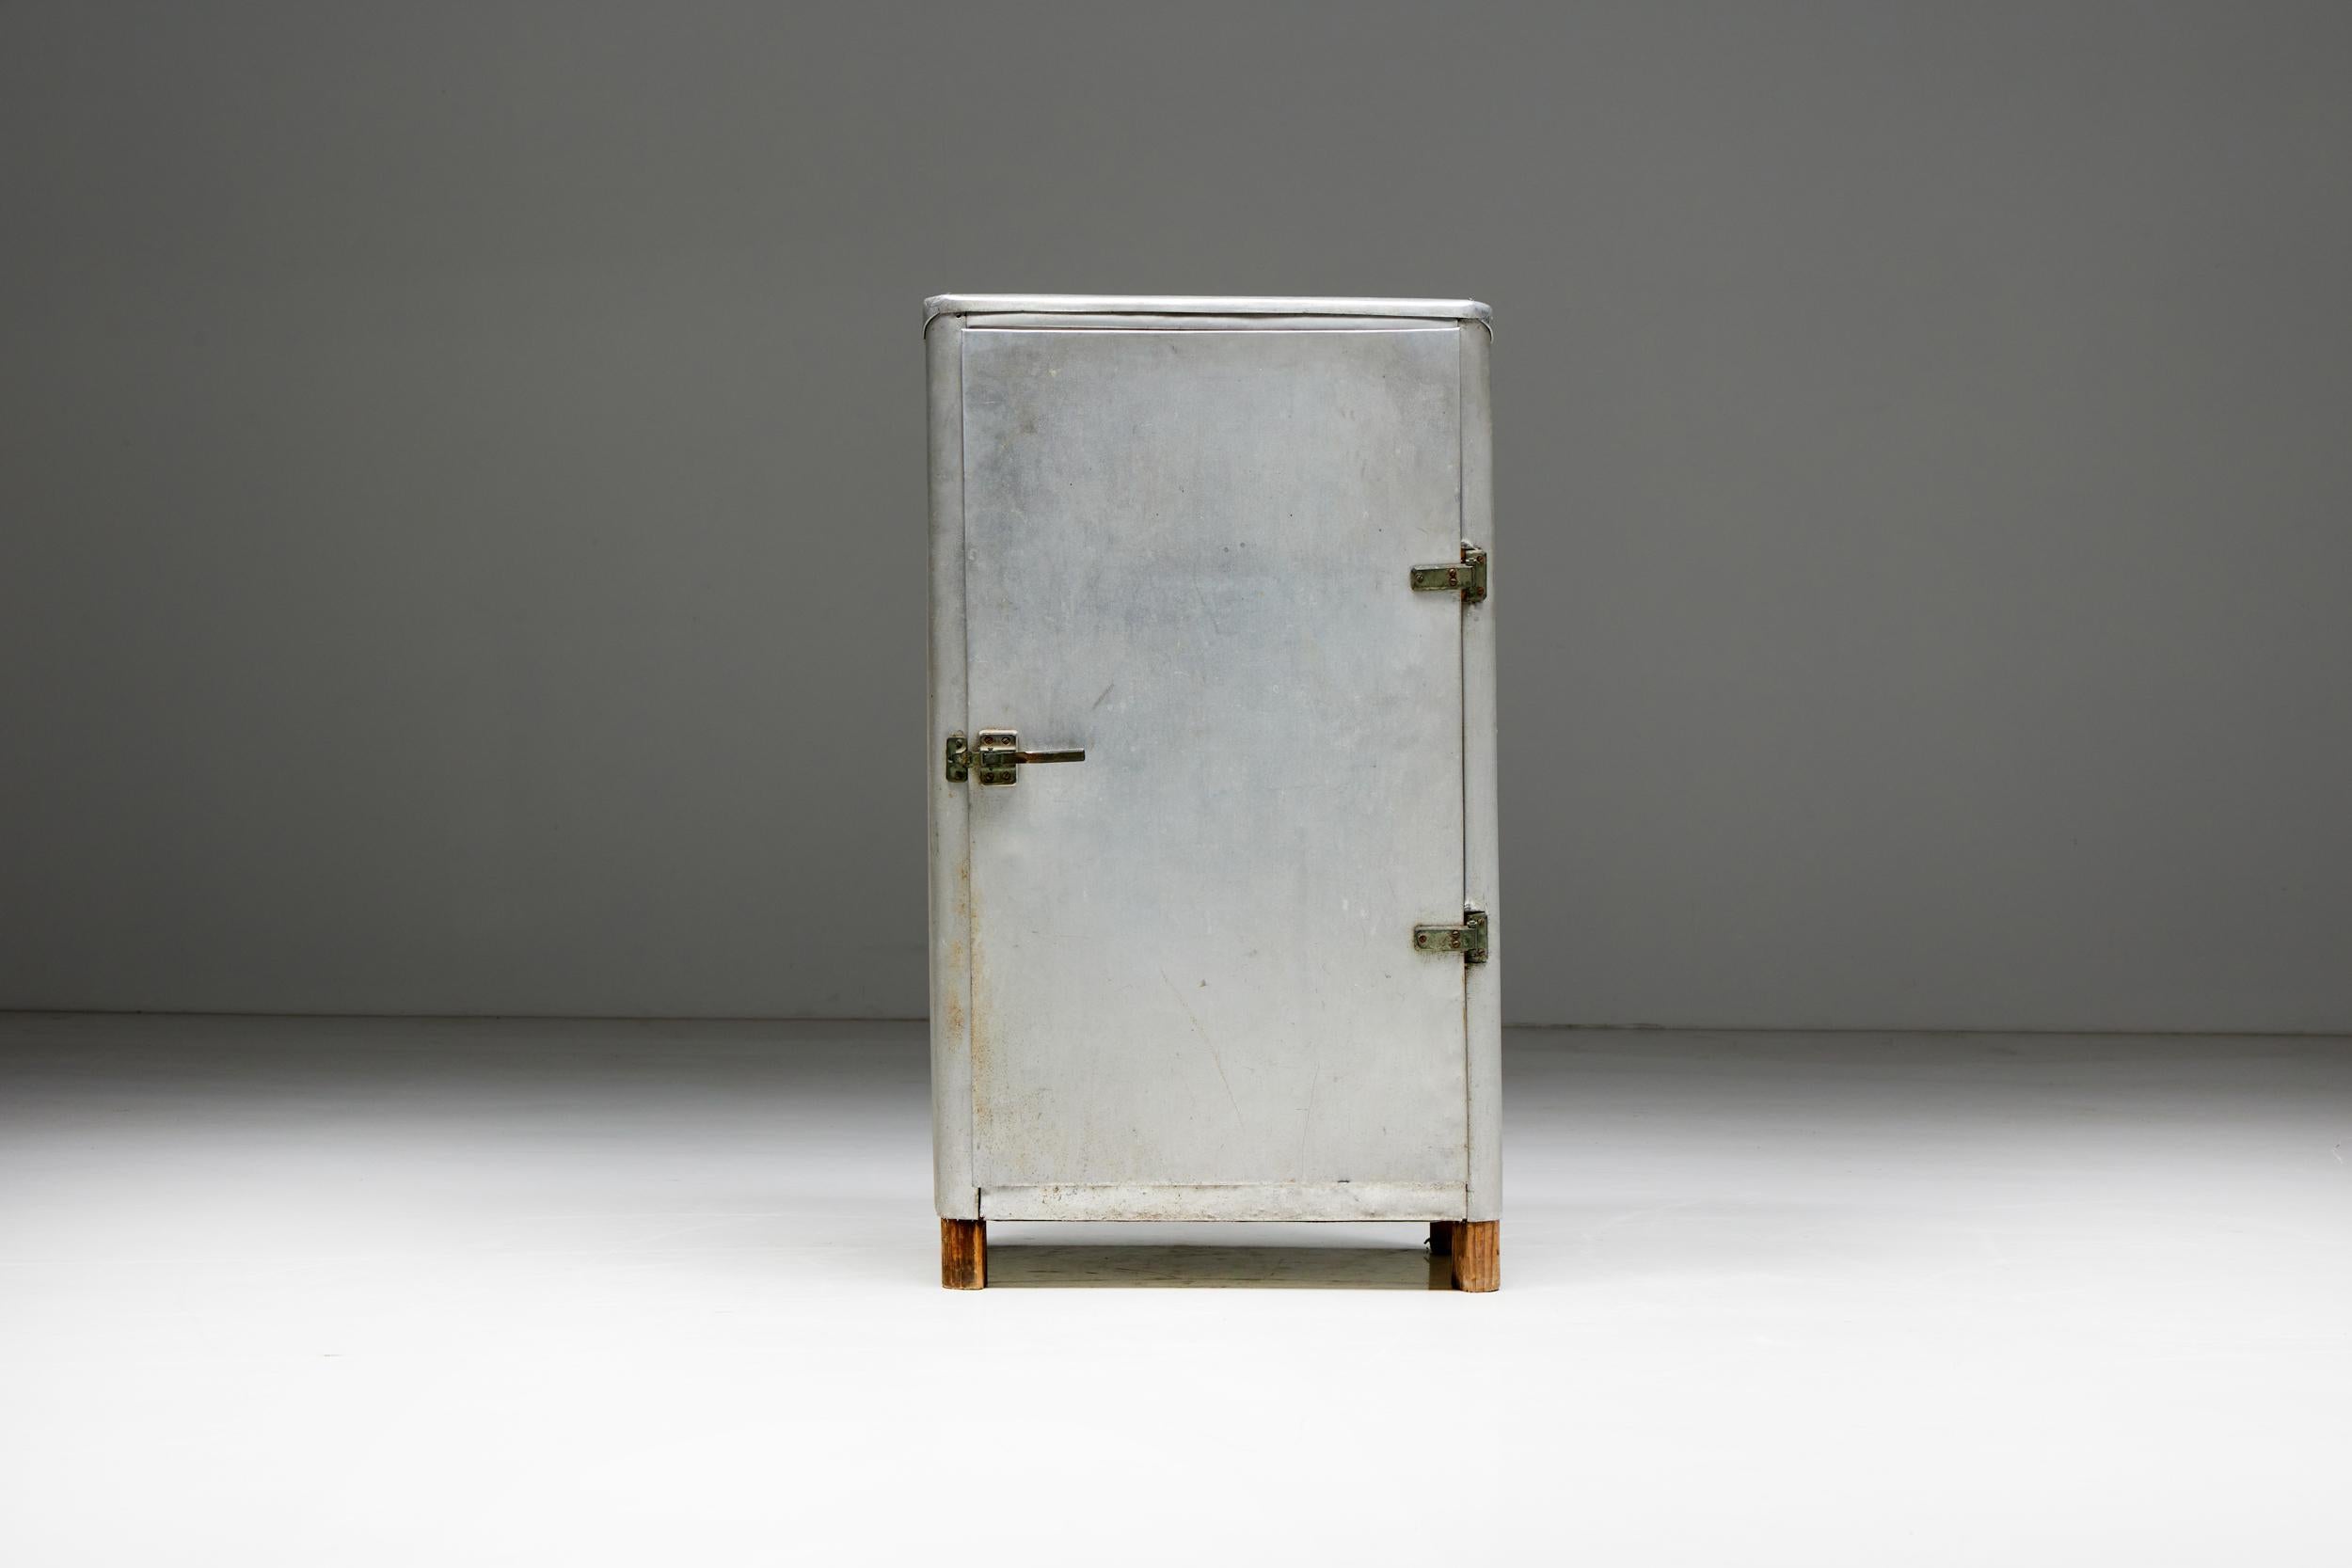 French Design; Industrial Design; 1950s; France; Aluminum; Brutalist; Mid-Century; Craftsmanship;

French aluminum cabinet that once served as a refrigerator, a timeless relic from the 1950s that captures the essence of industrial design. Crafted